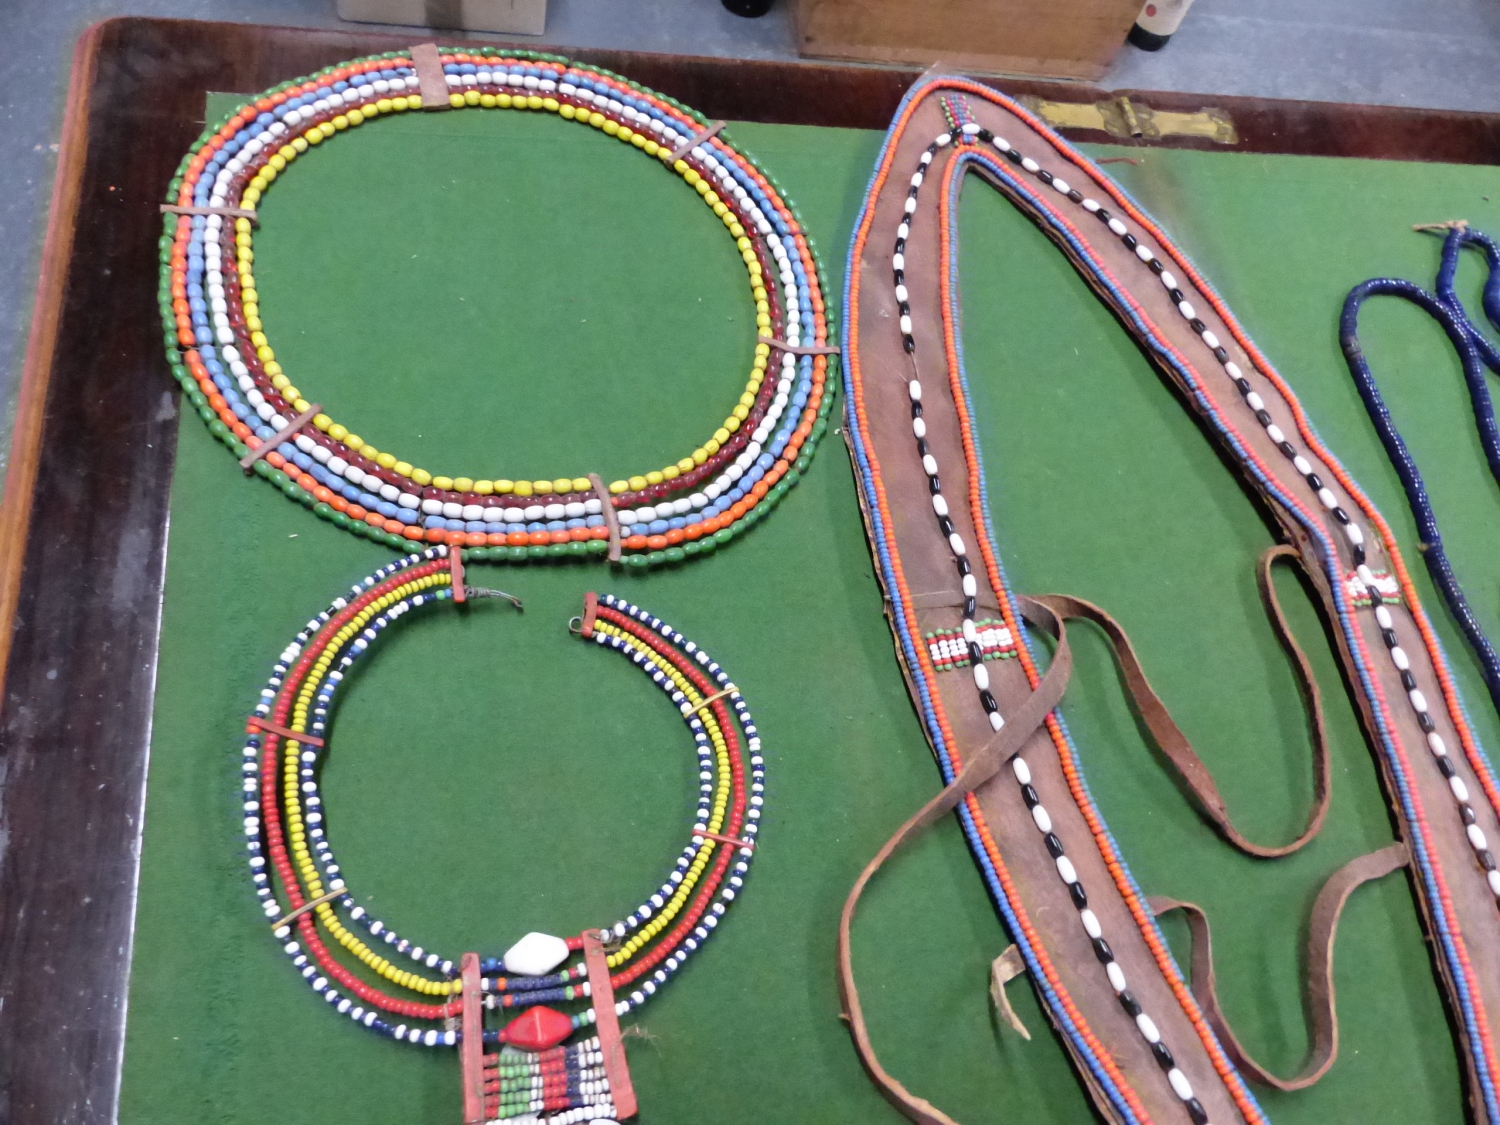 SIX KENYAN BEAD NECK PIECES TOGETHER WITH SEVEN BEAD NECKLACES - Image 2 of 4